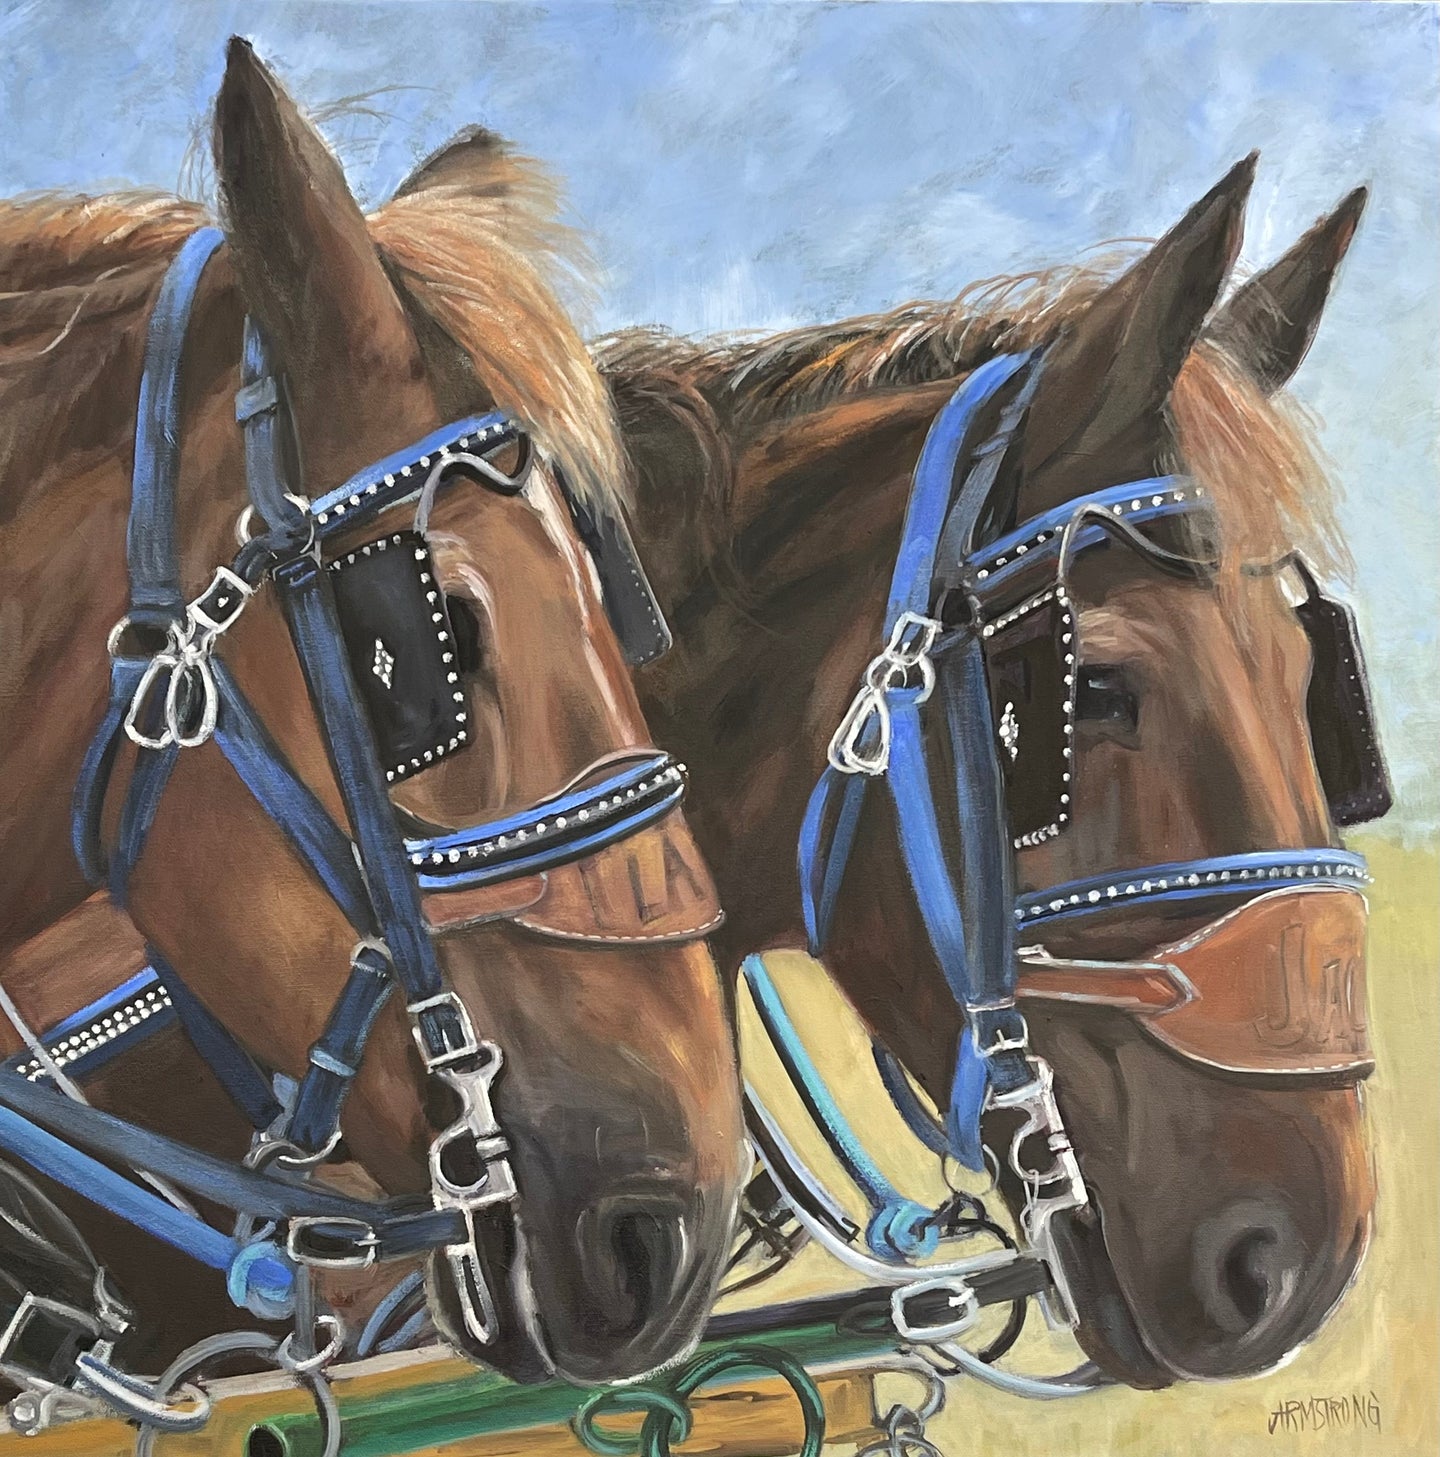 “Hold Your Horses” 24 x 24” oil